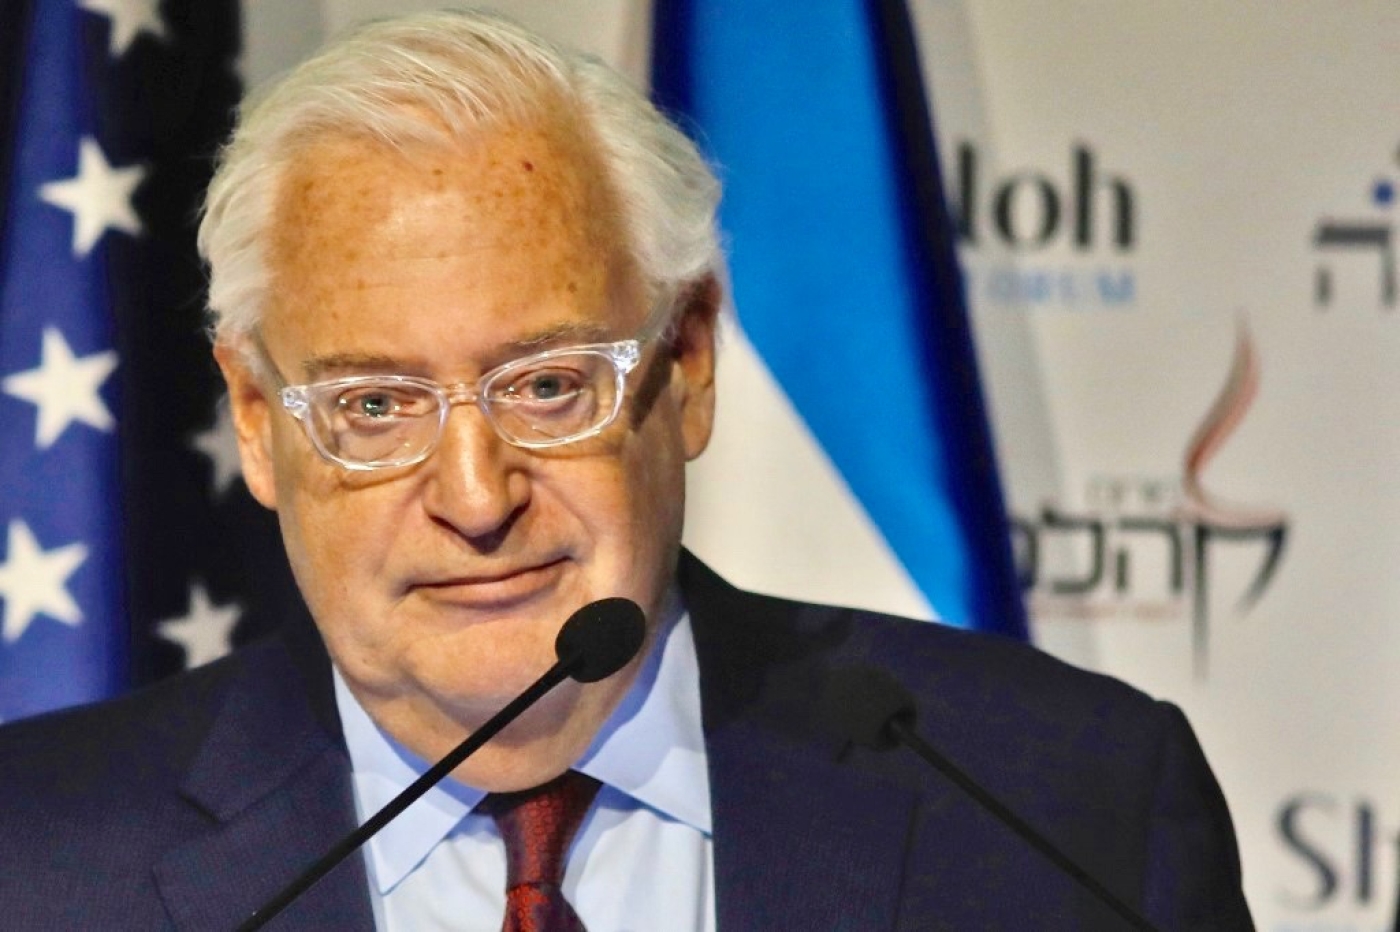 David Friedman predicted that the normalisation deals marked the beginning of the end of 'the Arab-Israeli conflict' 